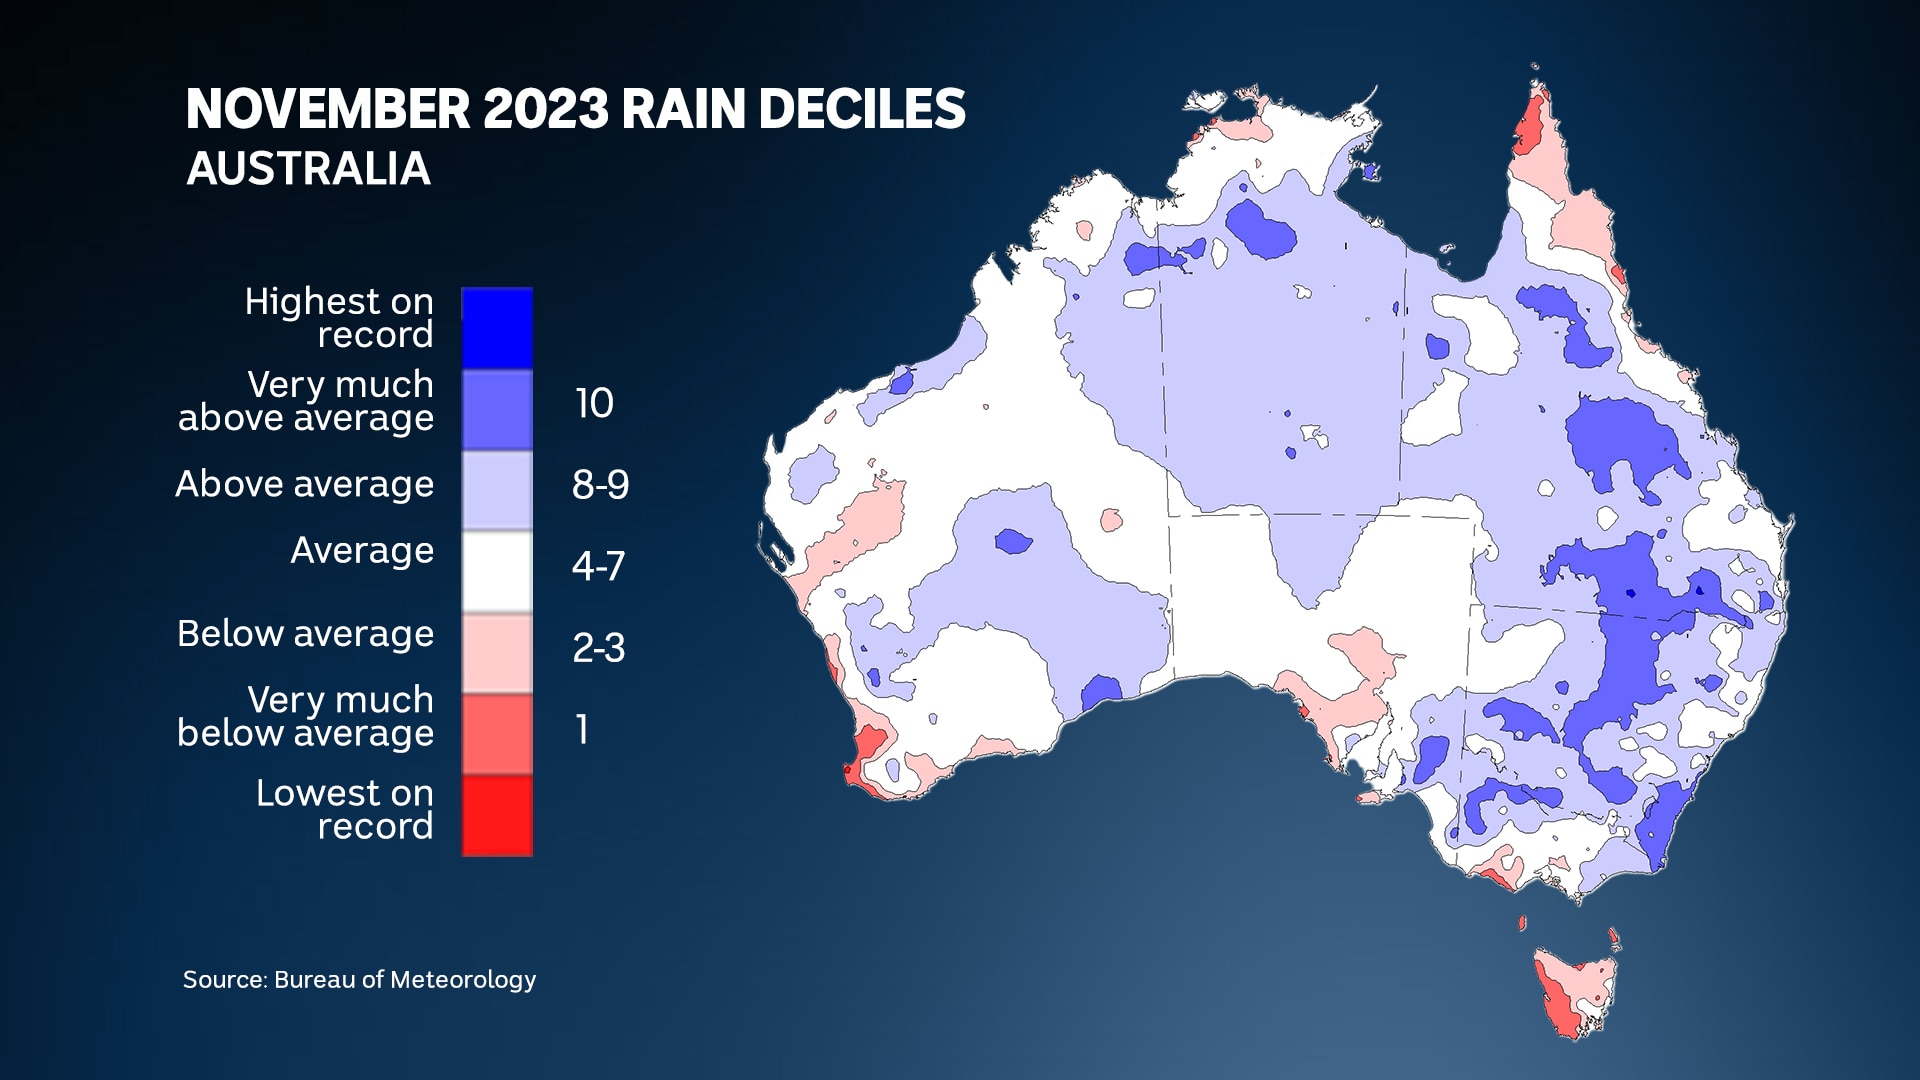 a graph of australia showing the rain falls across the country for november 2023